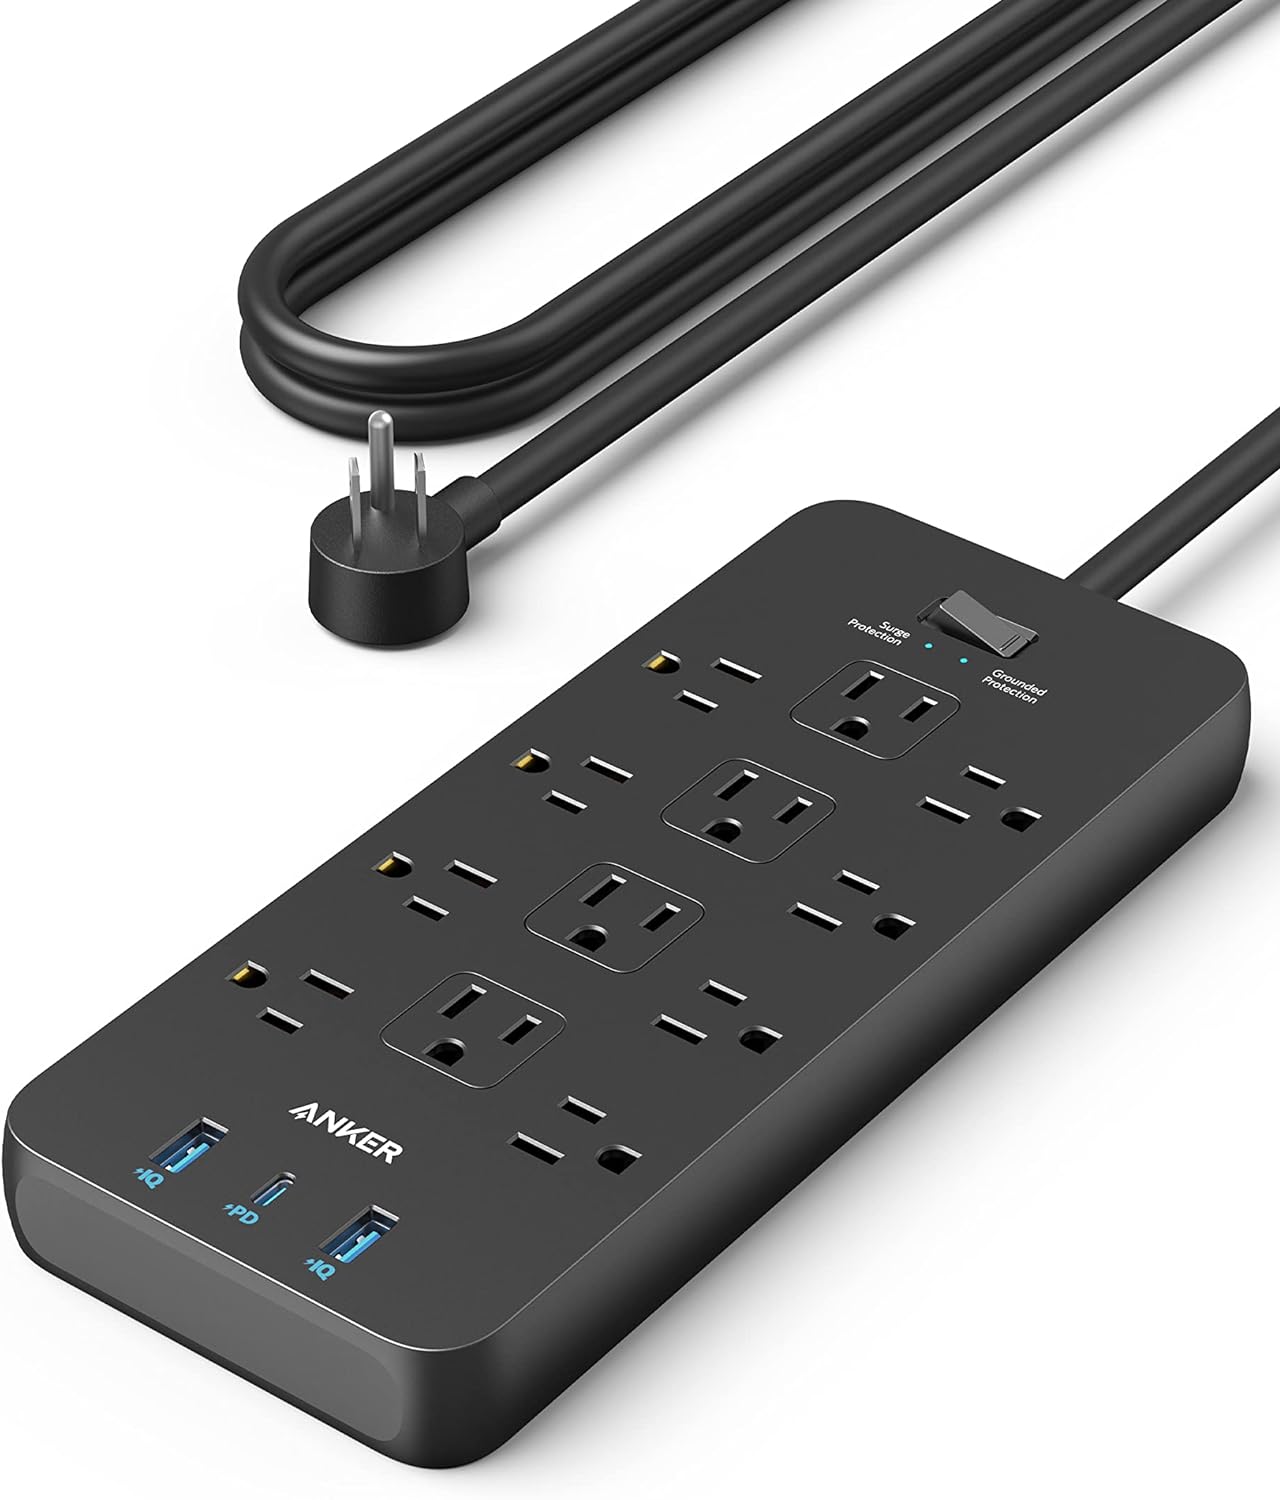 Anker 12-Outlet Surge Protector Power Strip w/ 5' Cable (Black) $22 & More + Free Shipping w/ Prime or on $35+